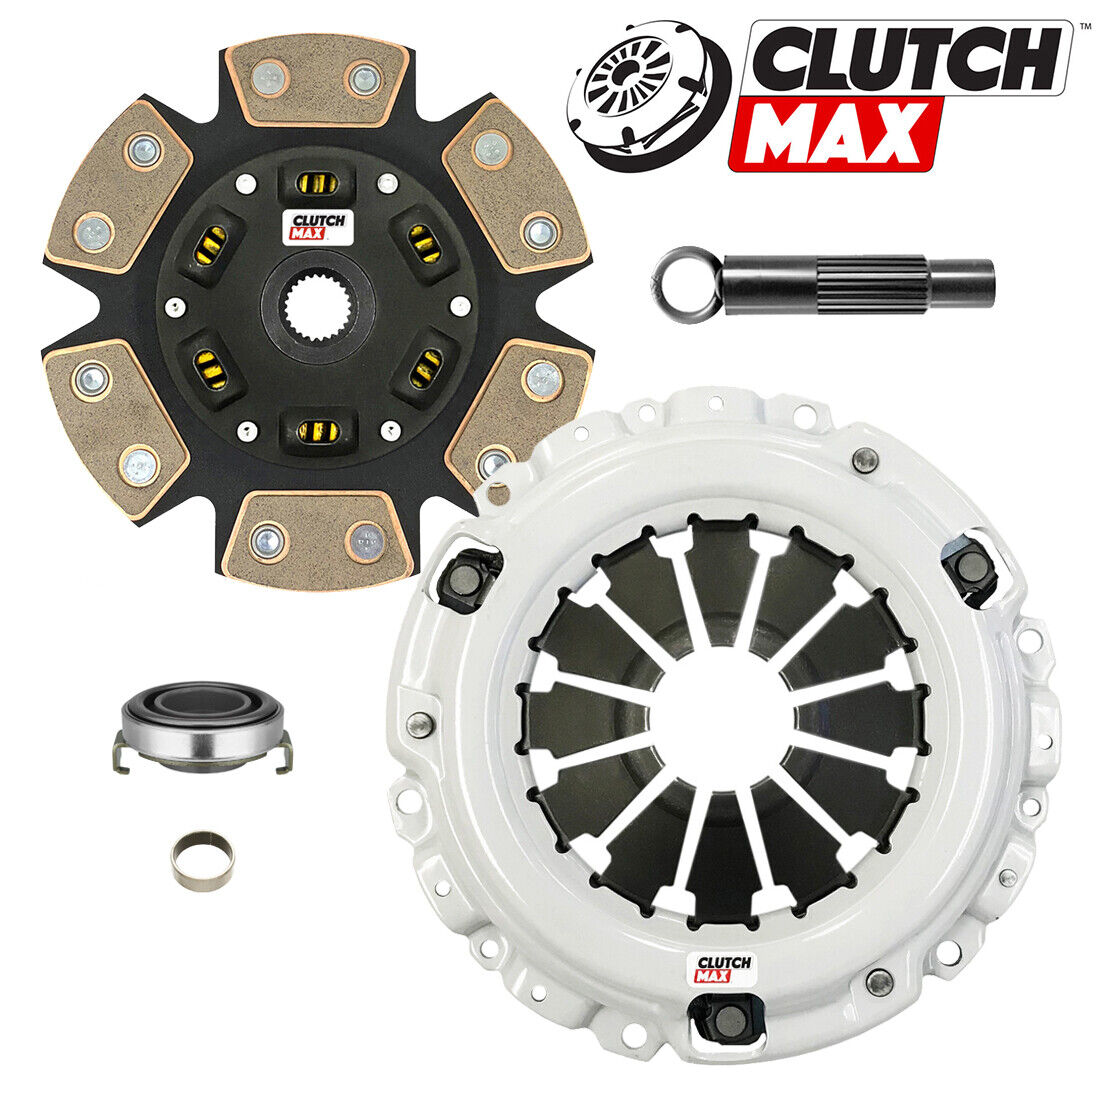 CM STAGE 3 CLUTCH KIT FOR 02-06 RSX TYPE-S / 06-11 CIVIC SI 6-SPEED K20A2 K20Z